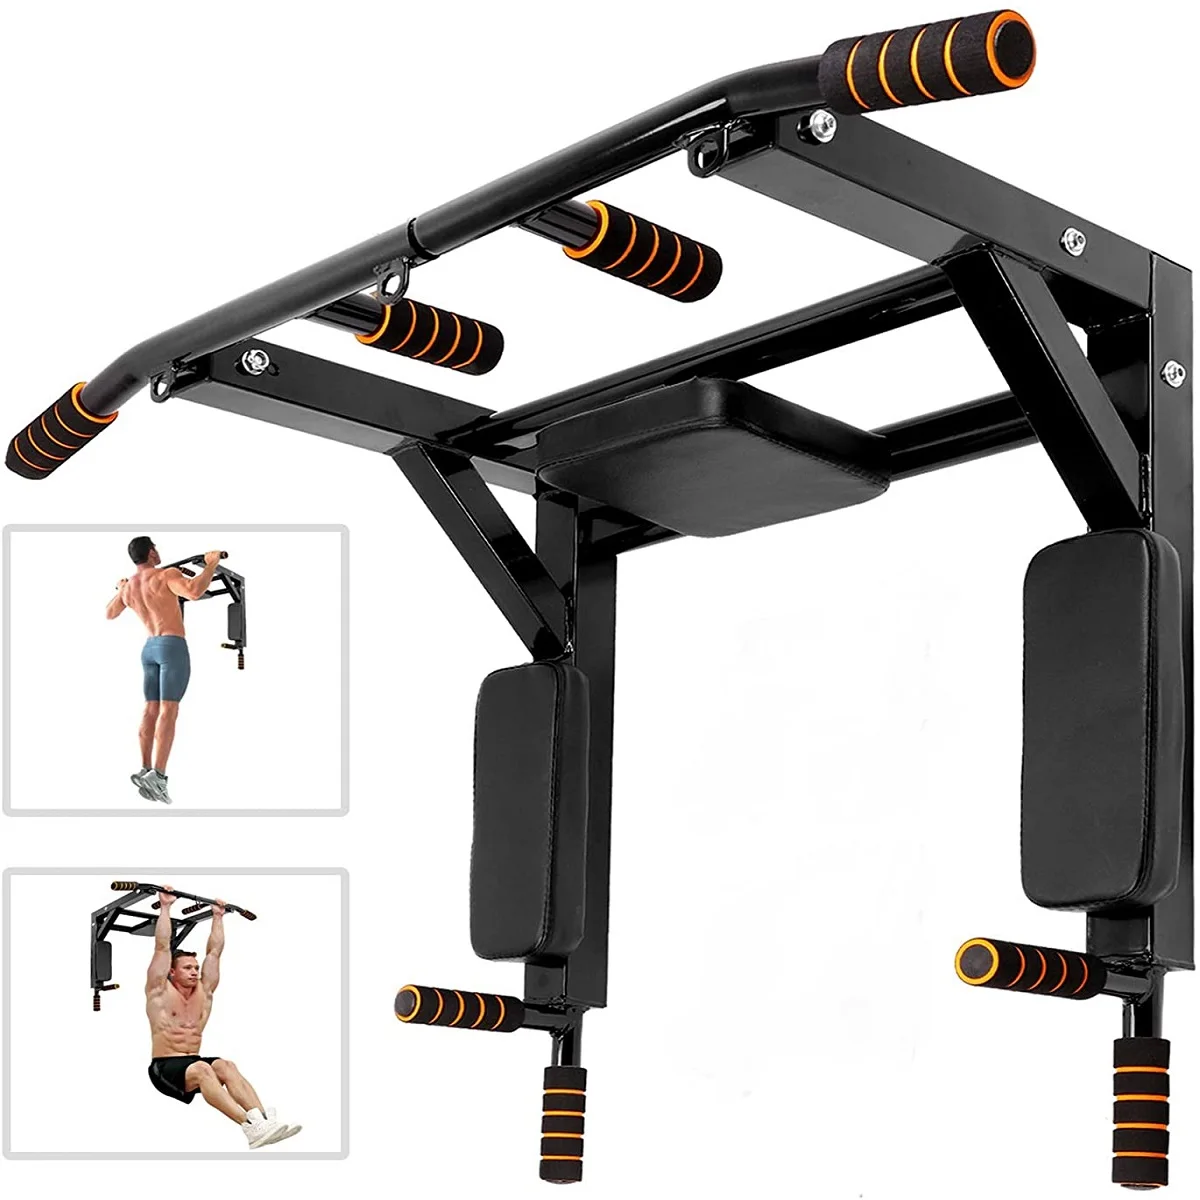 

Horizontal Bars Dip Station Wall Mounted Pull Up Bar Chin Up Bars Home Gym Workout Muscle Training Fitness Equipments Exercise